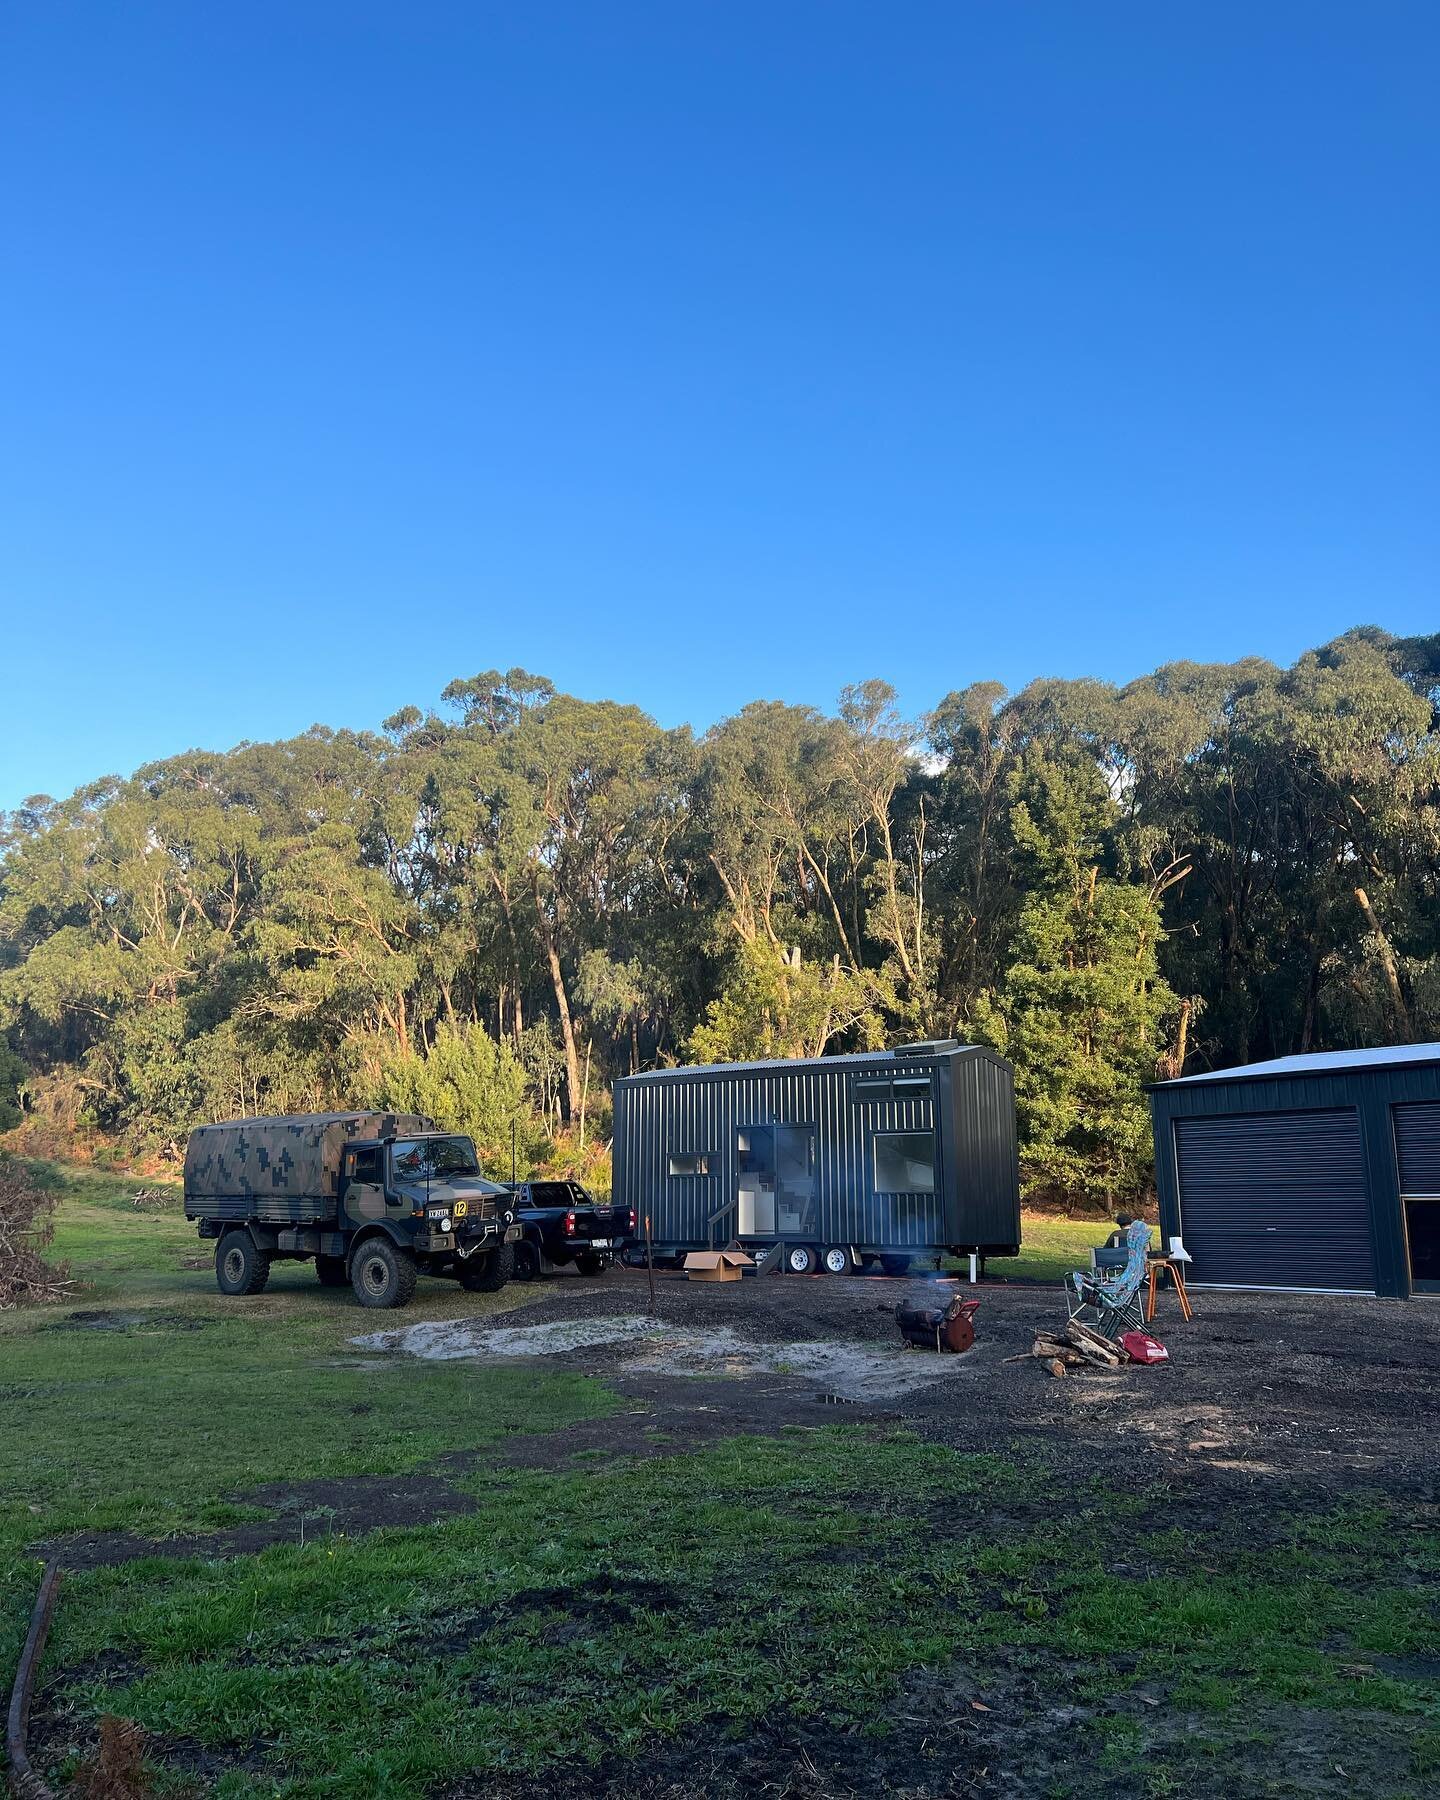 Another successful delivery thanks to @ricks_towing_vic
#treehab #tinyhouse #tinyhome #offgrid